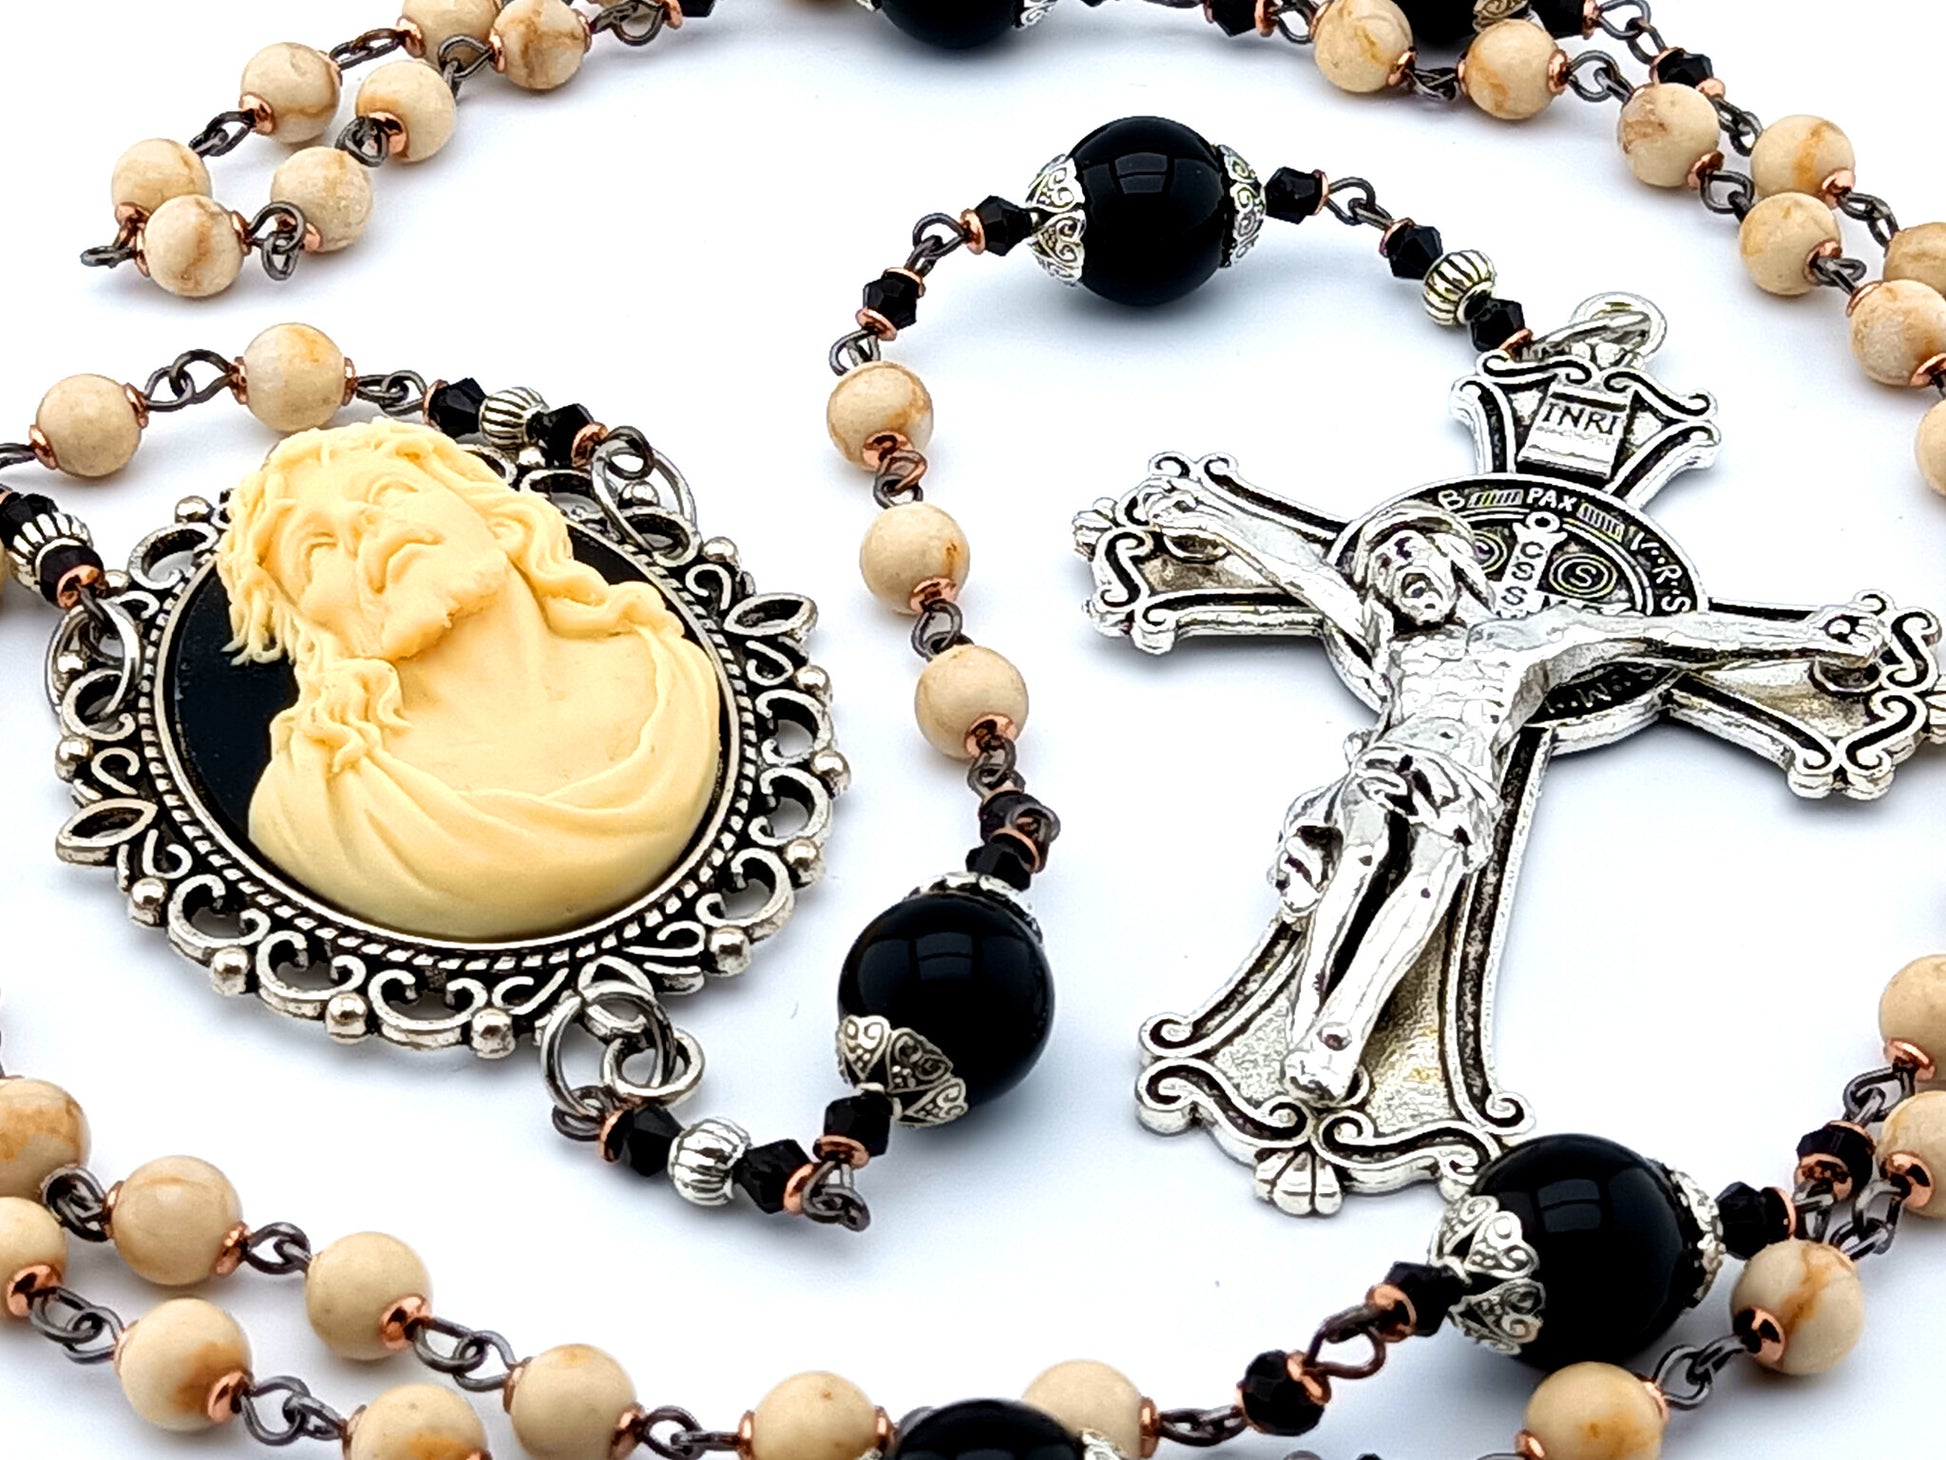 Ecce Home cameo unique rosary beads with jasper and onyx gemstone beads and Saint Benedict crucifix.